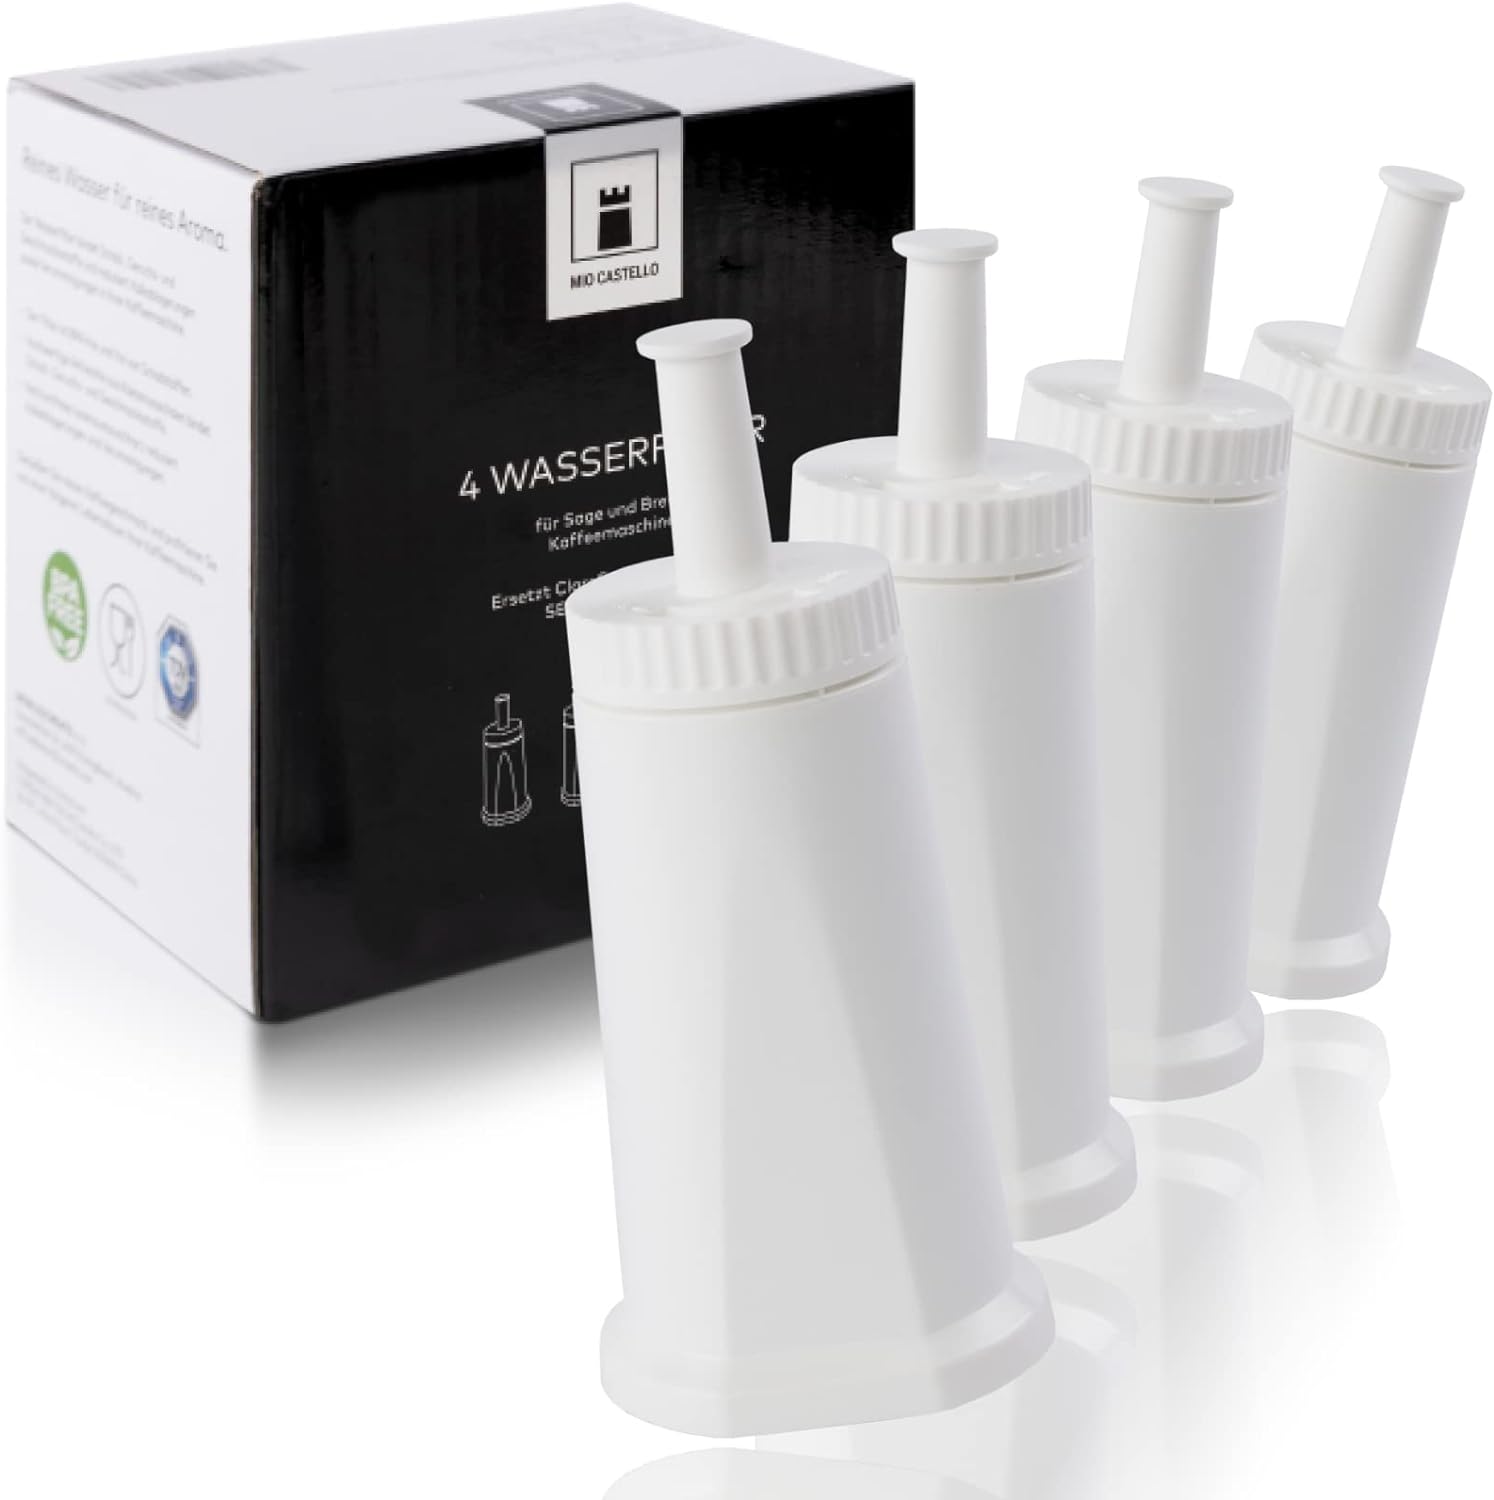 Miocastello® 4x Water Filter for Sage/Breville (TÜV Süd Tested) - Replaces Claro Swiss Ses008 BES008 for SES990 SES878 SES980 SES920 SES810 BES980 BES878 ...